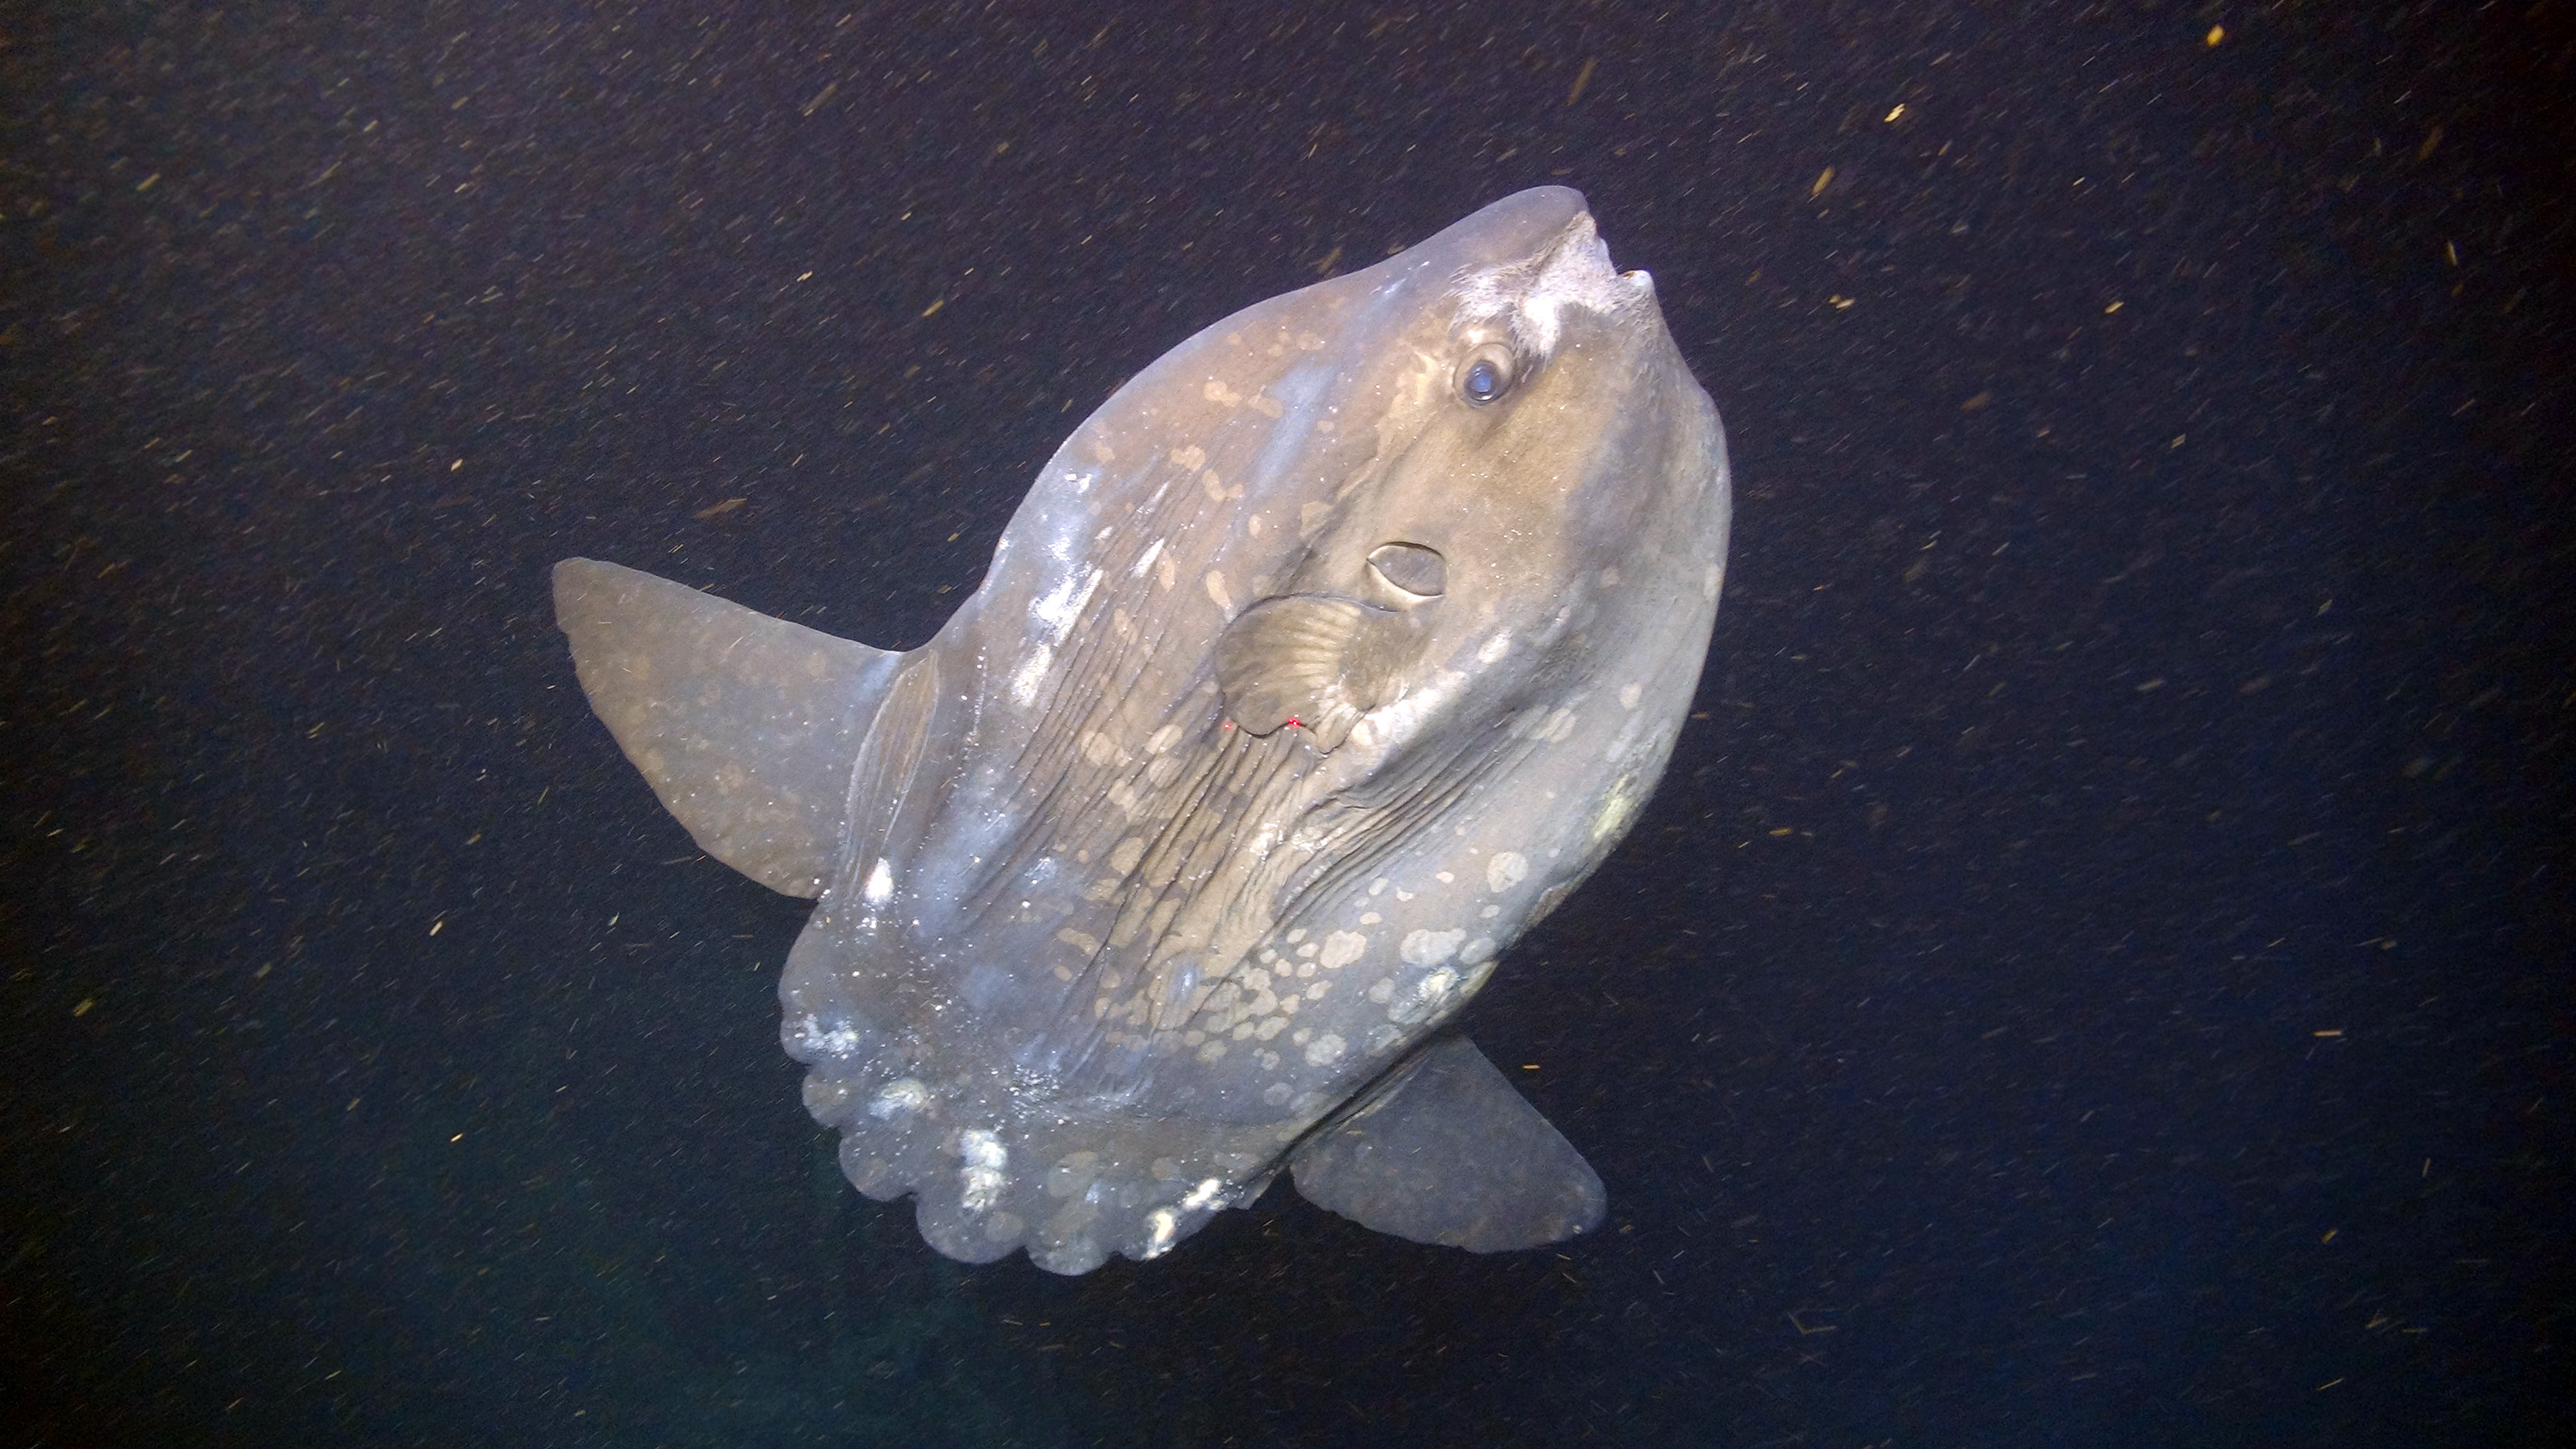  Ocean sunfish or common mola (Mola mola) in Hudson Canyon off the coast of New York and New Jersey.